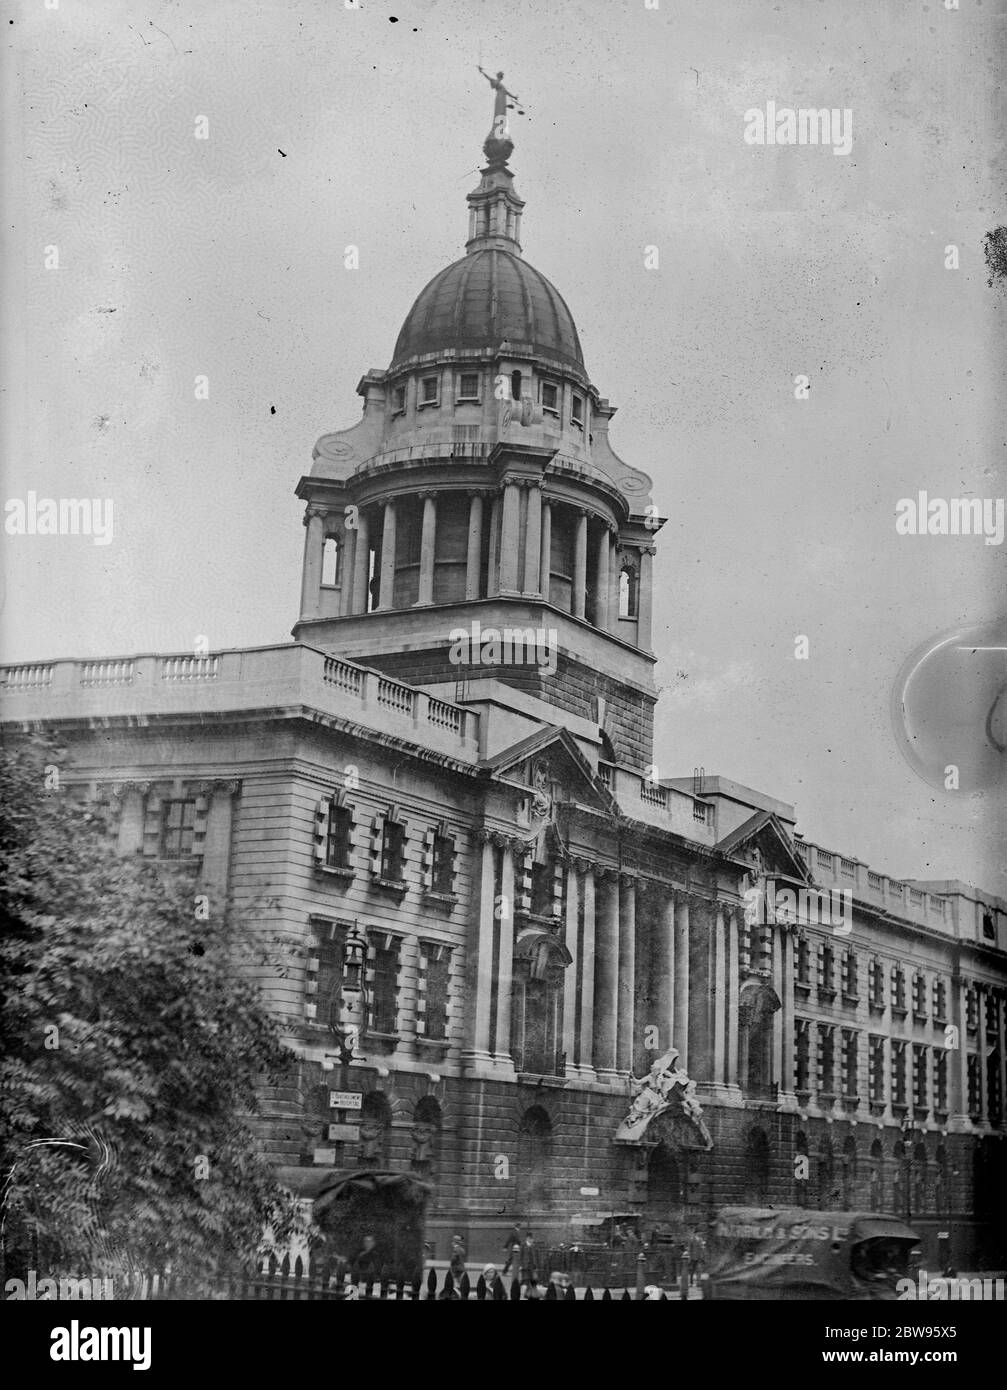 The Old Bailey Stock Photo - Alamy